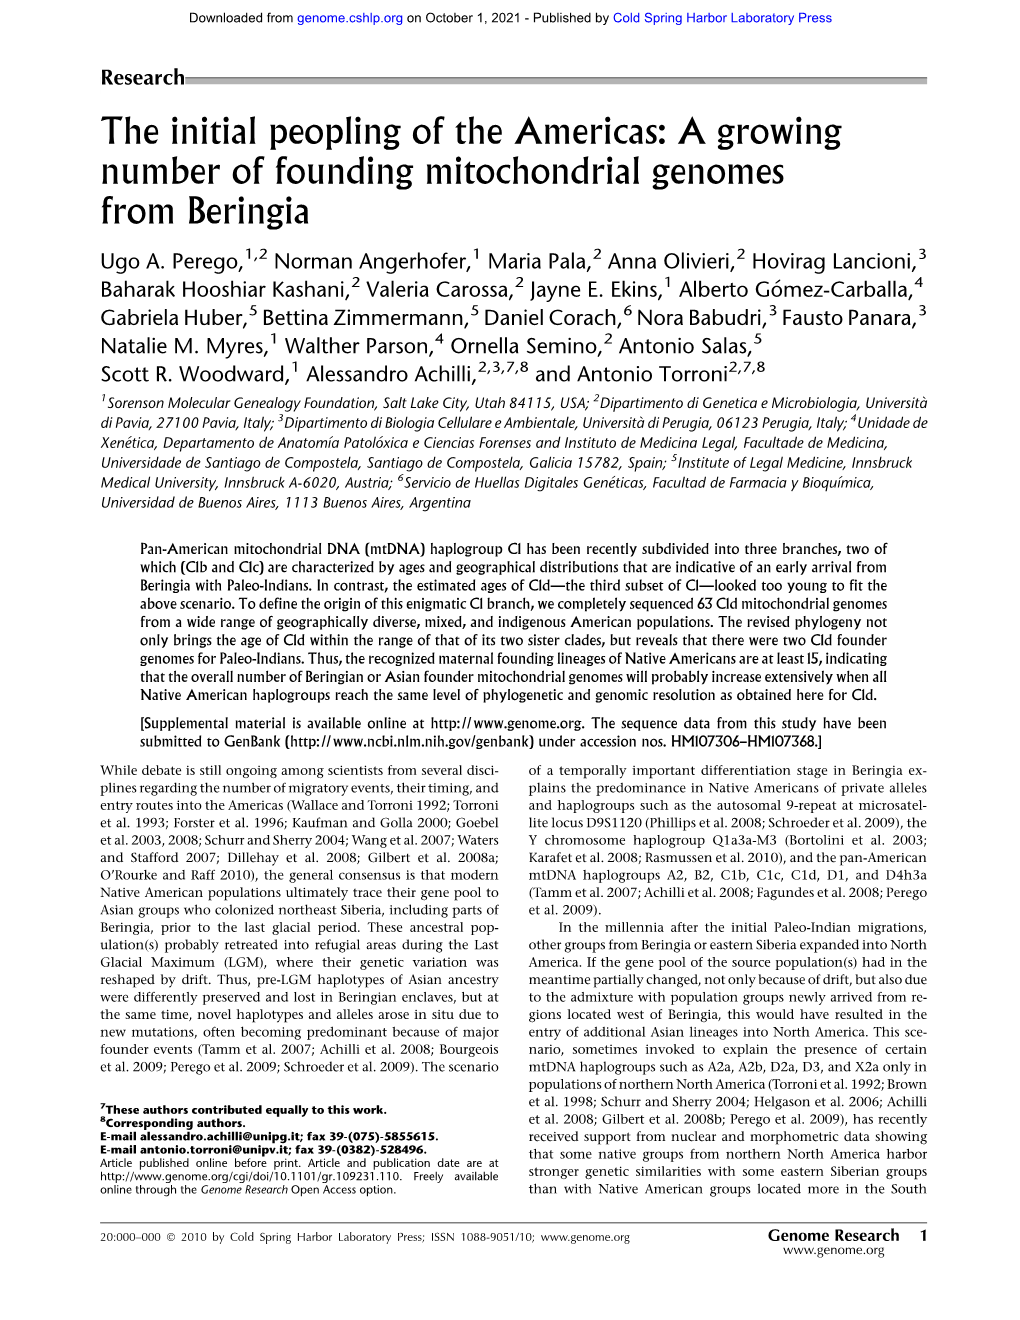 A Growing Number of Founding Mitochondrial Genomes from Beringia